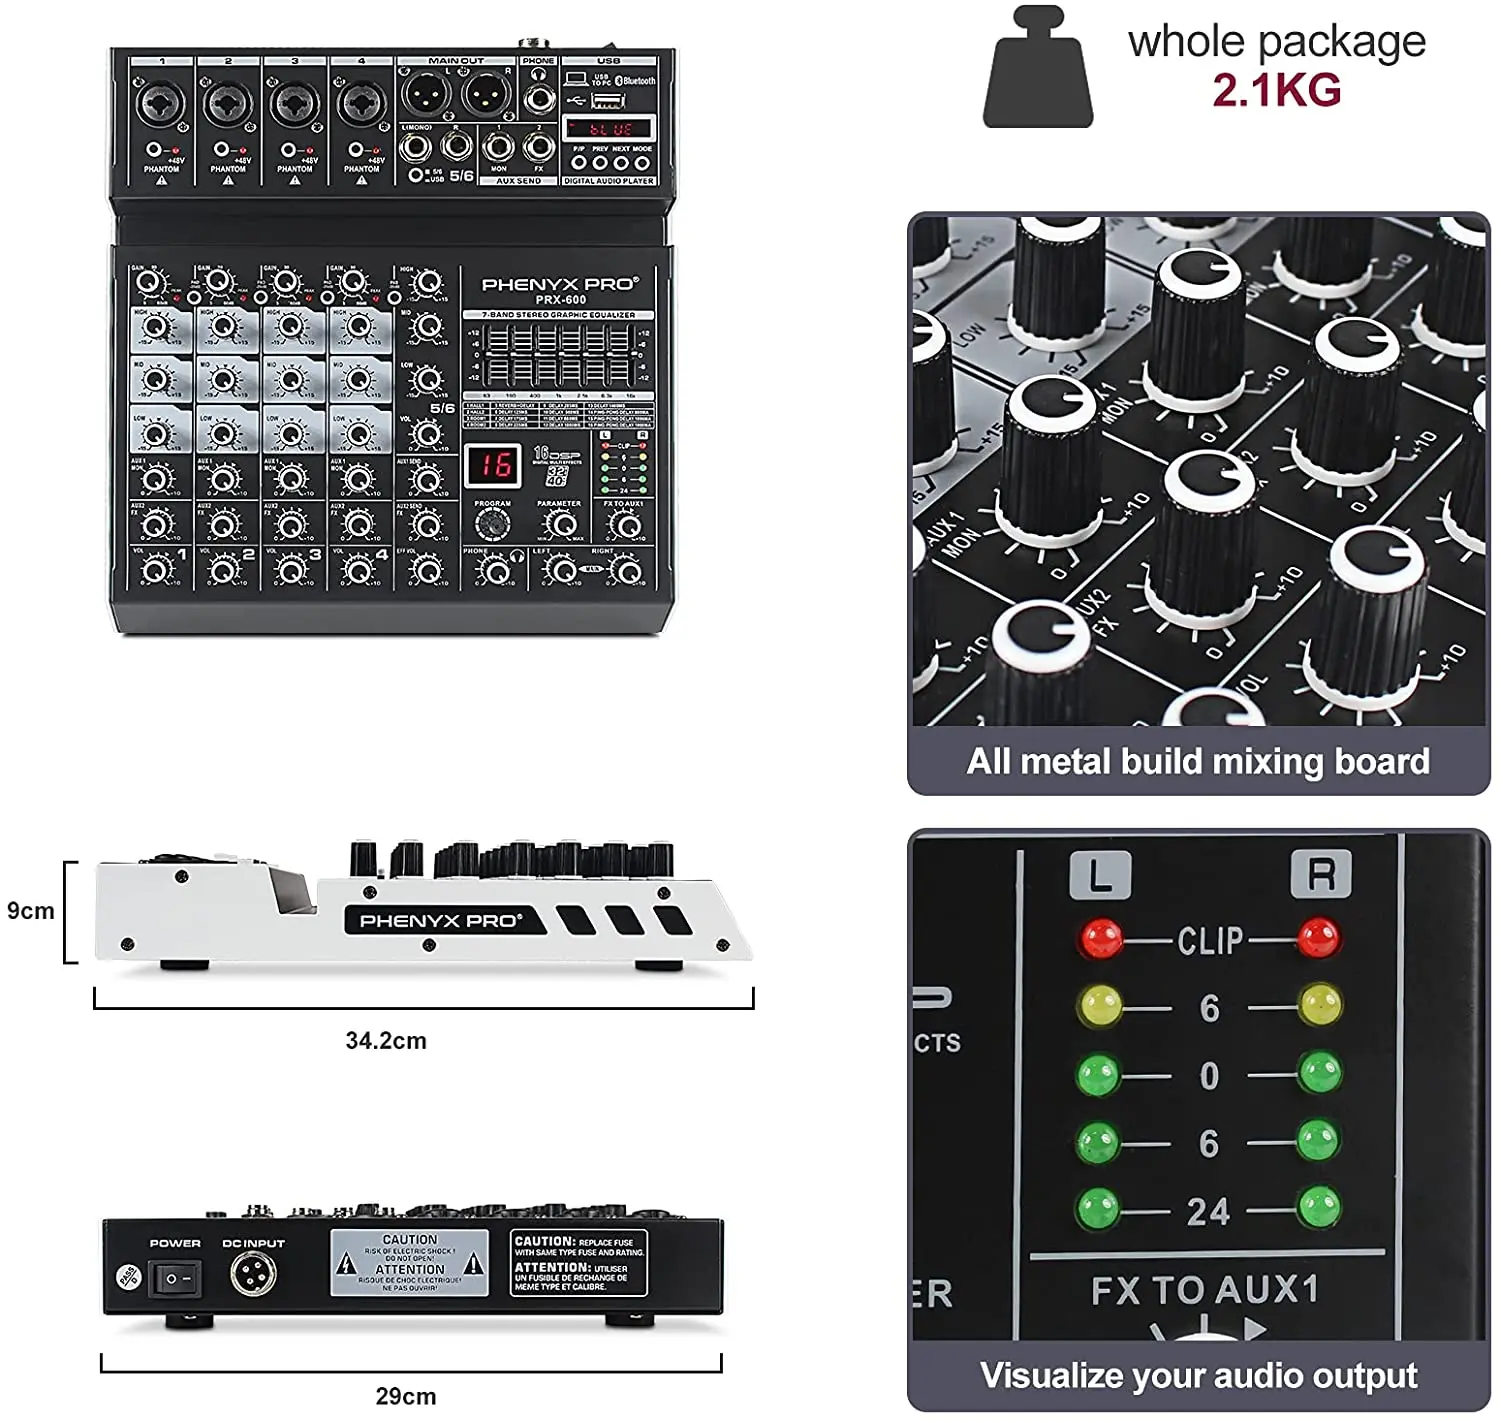 https://ae01.alicdn.com/kf/H13467e29dfb64f81983e7964f8948b767/PHENYX-PRO-6-Channel-Audio-Mixer-with-Stereo-Equalizer-3-Band-EQ-USB-Bluetooth-Function-16.jpg